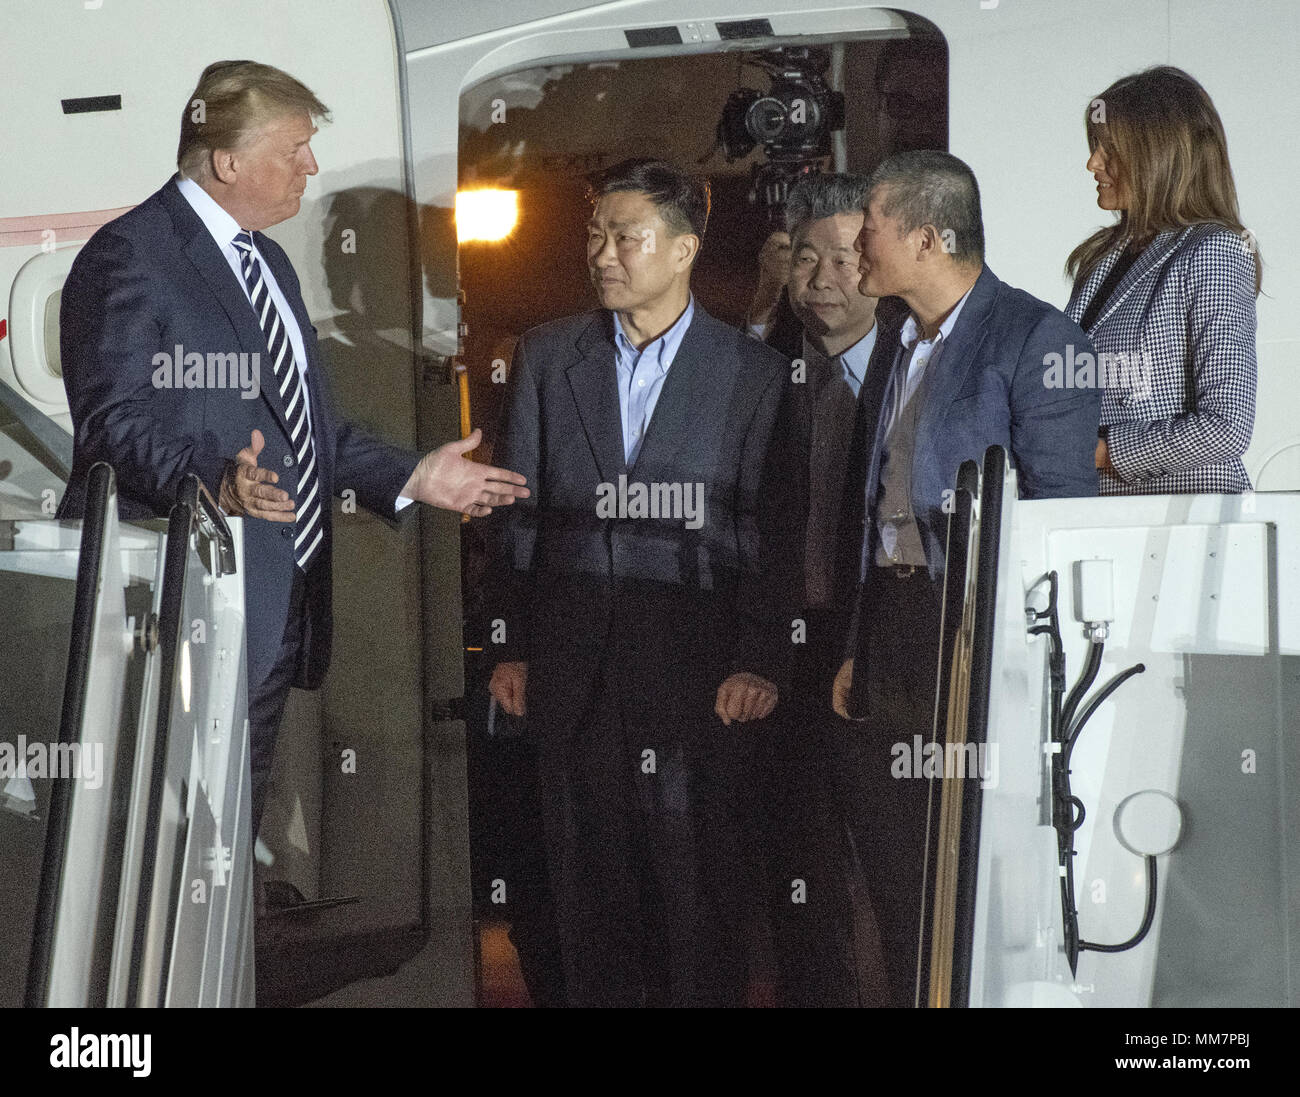 Suitland, MD, USA. 10th May, 2018. President DONALD TRUMP and his wife MELANIA TRUMP welcoming the three American detainees (KIM DONG-CHUL, KIM HAK-SONG, and TONY KIM) held in captivity in North Korea at Joint Base Andrews in Suitland, Maryland. Credit: Ron Sachs/CNP/ZUMA Wire/Alamy Live News Stock Photo